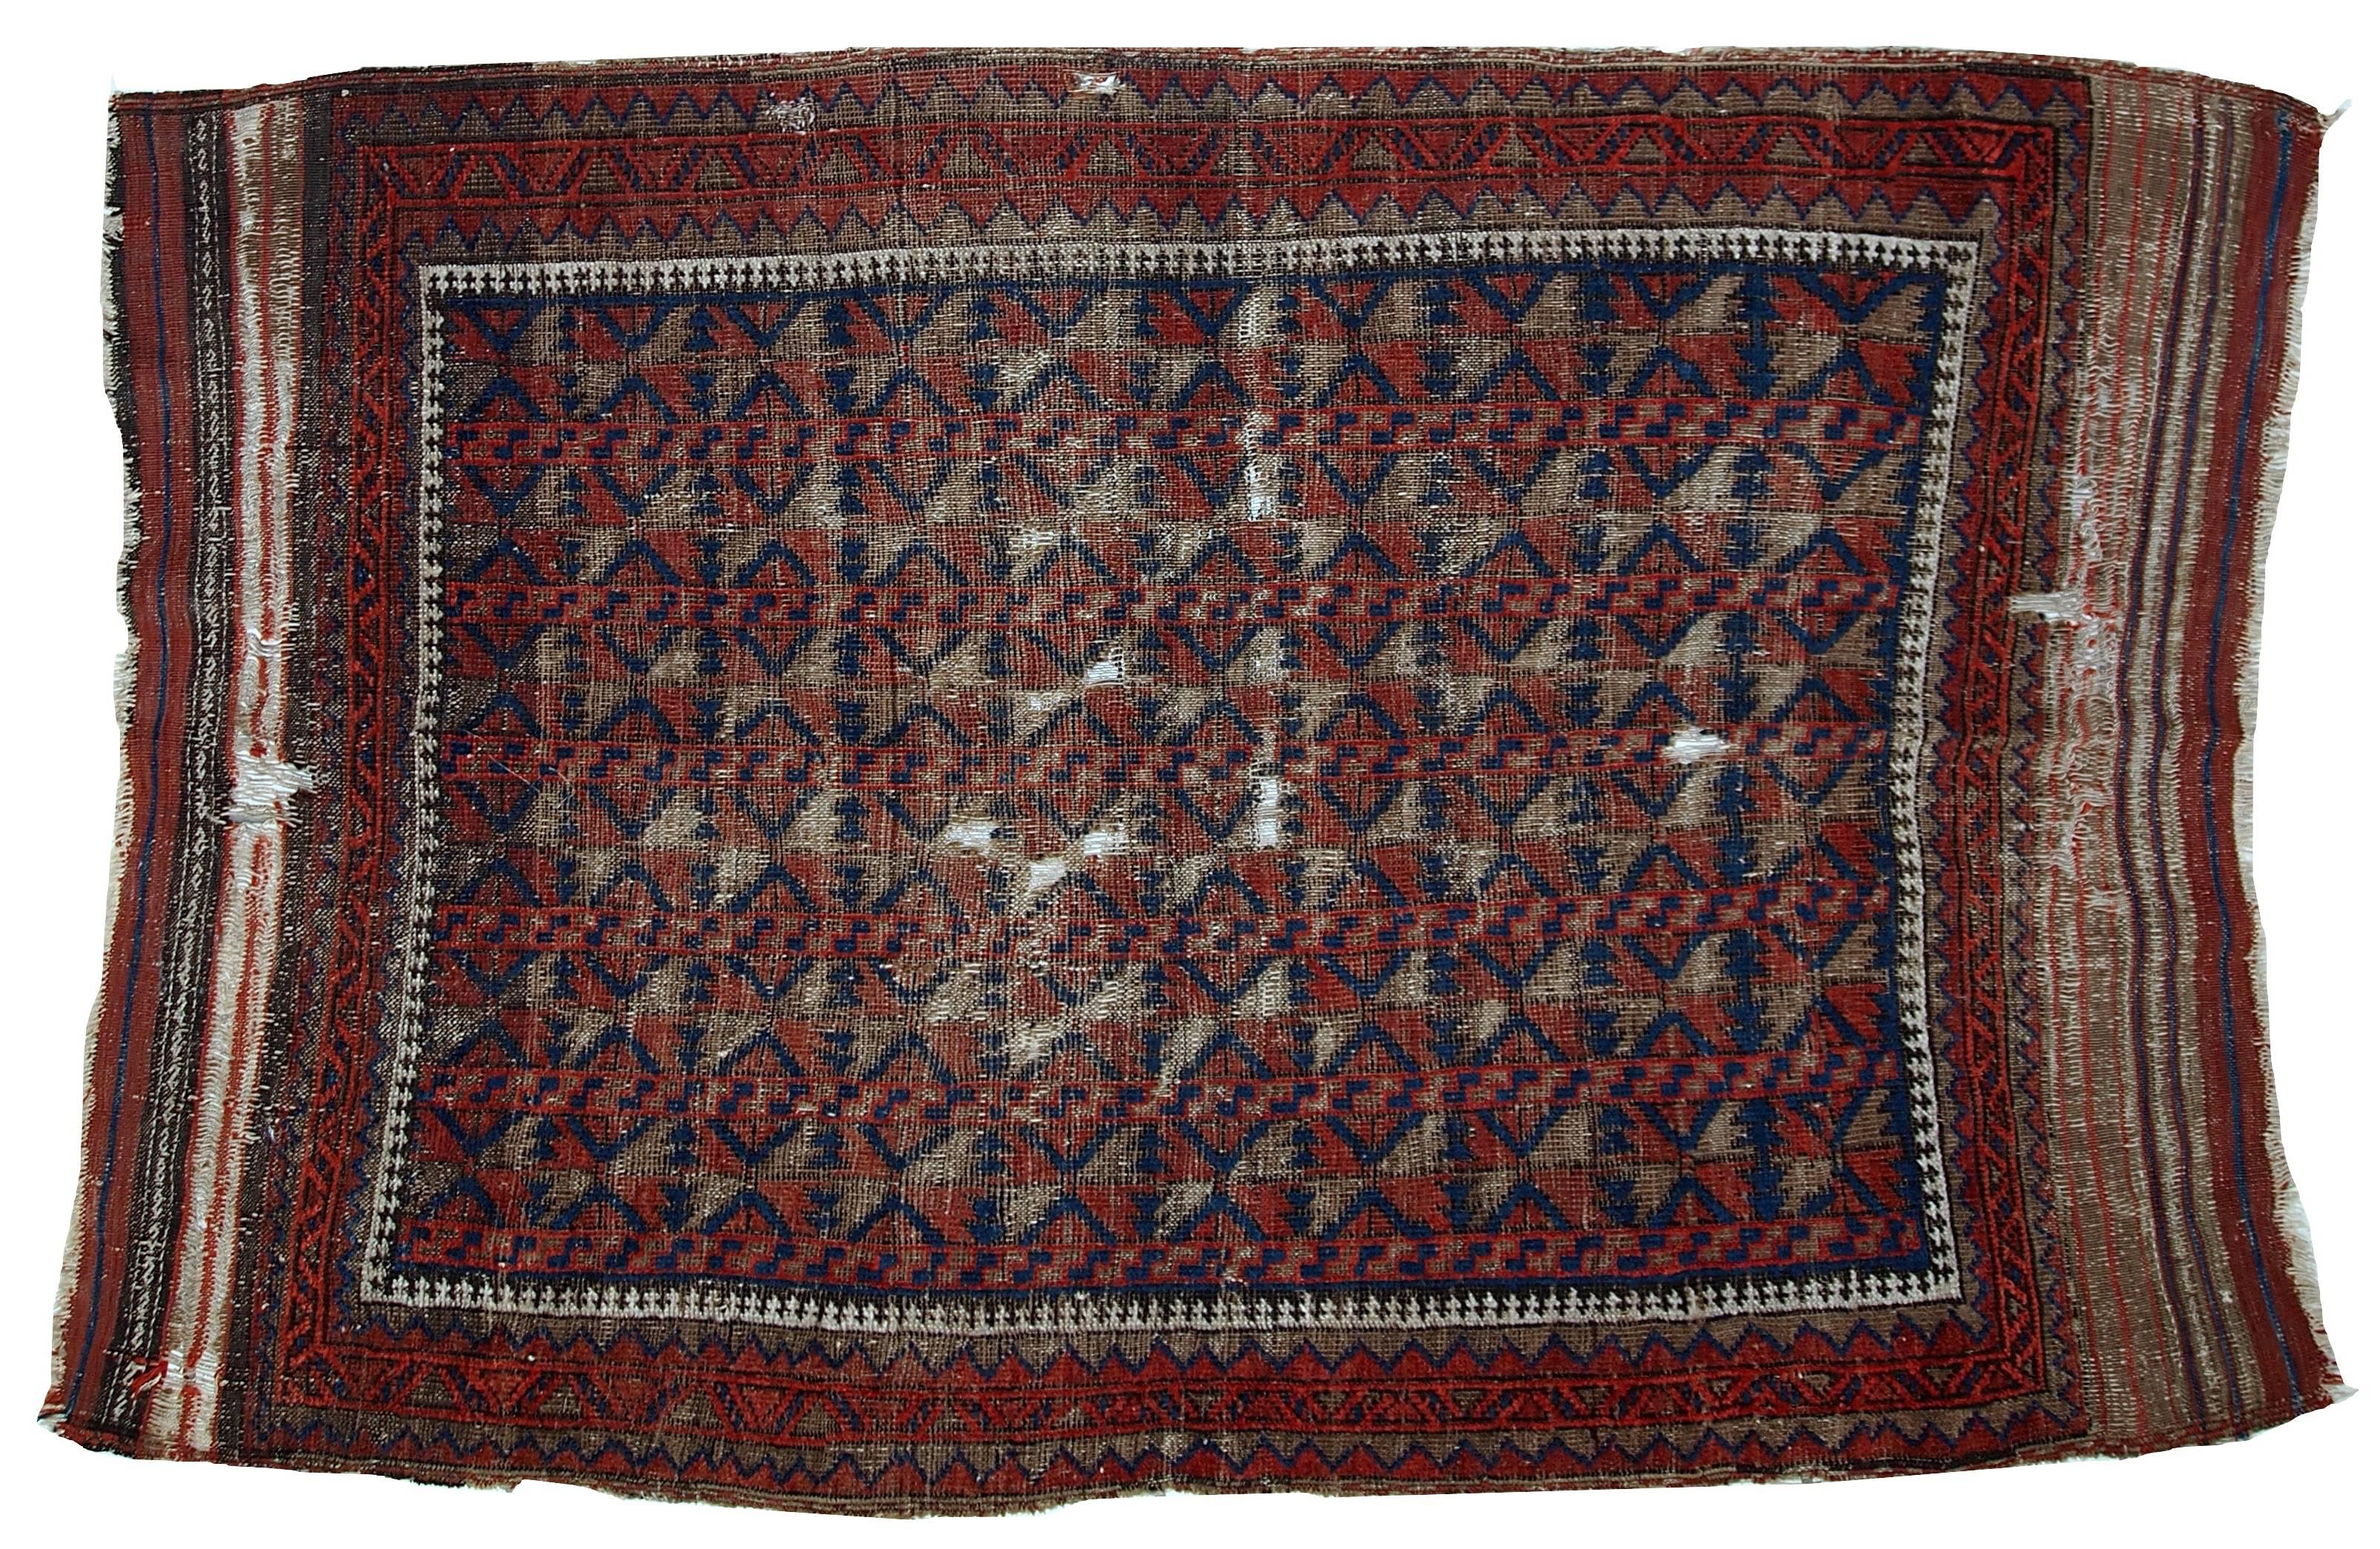 Antique handmade Afghan Baluch rug. The background contains two main shades: navy blue and deep burgundy. Repeating diamond shaped background. Nice tribal border surrounding the central area. The rug is from the end of 19th century? It is very thin